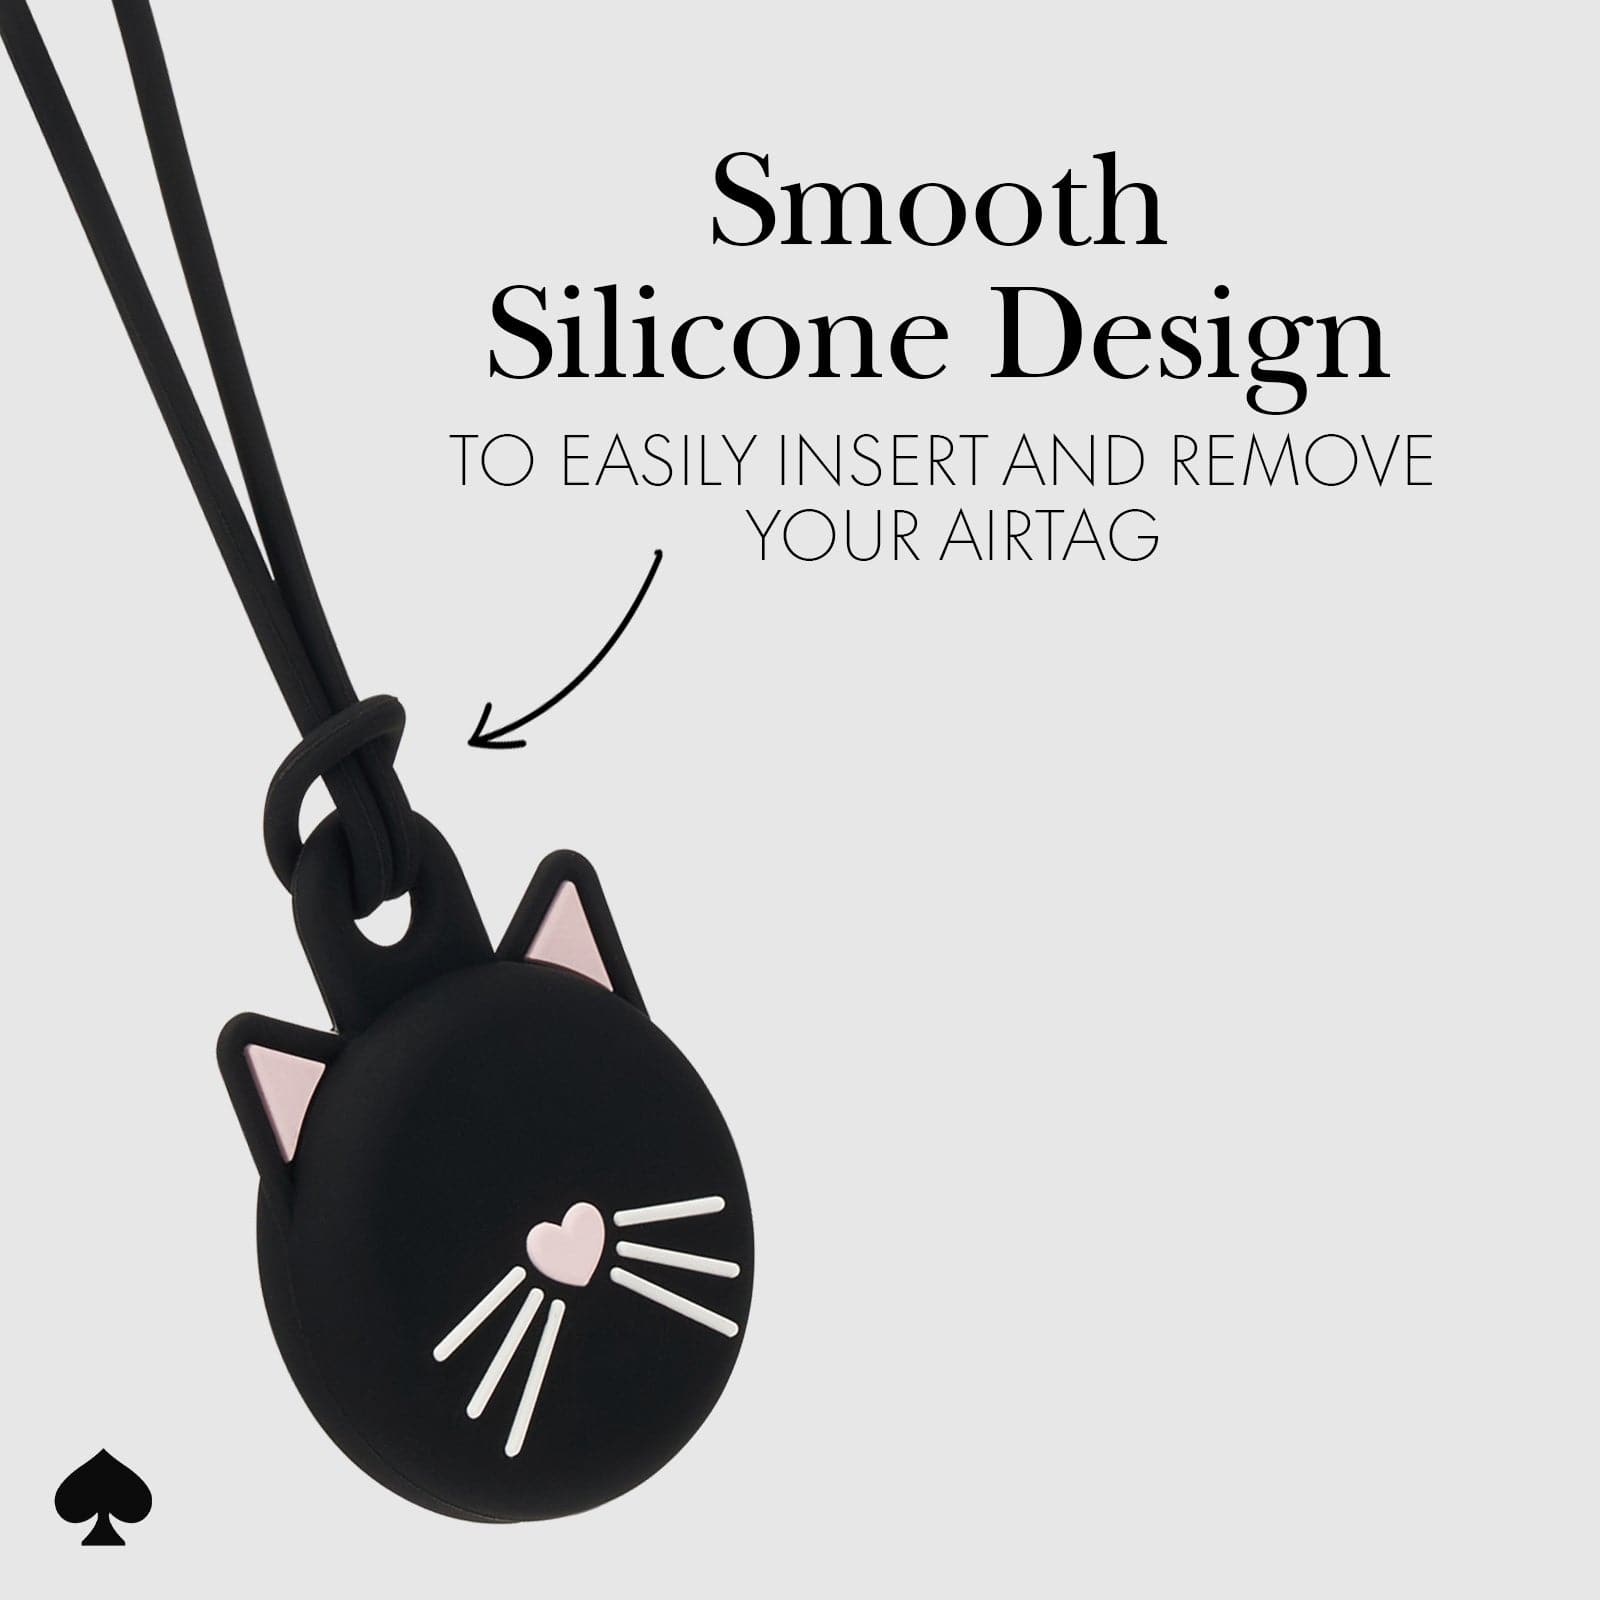 SMOOTH SILICONE DESIGN TO EASILY INSERT AND REMOVE YOUR AIRTAG